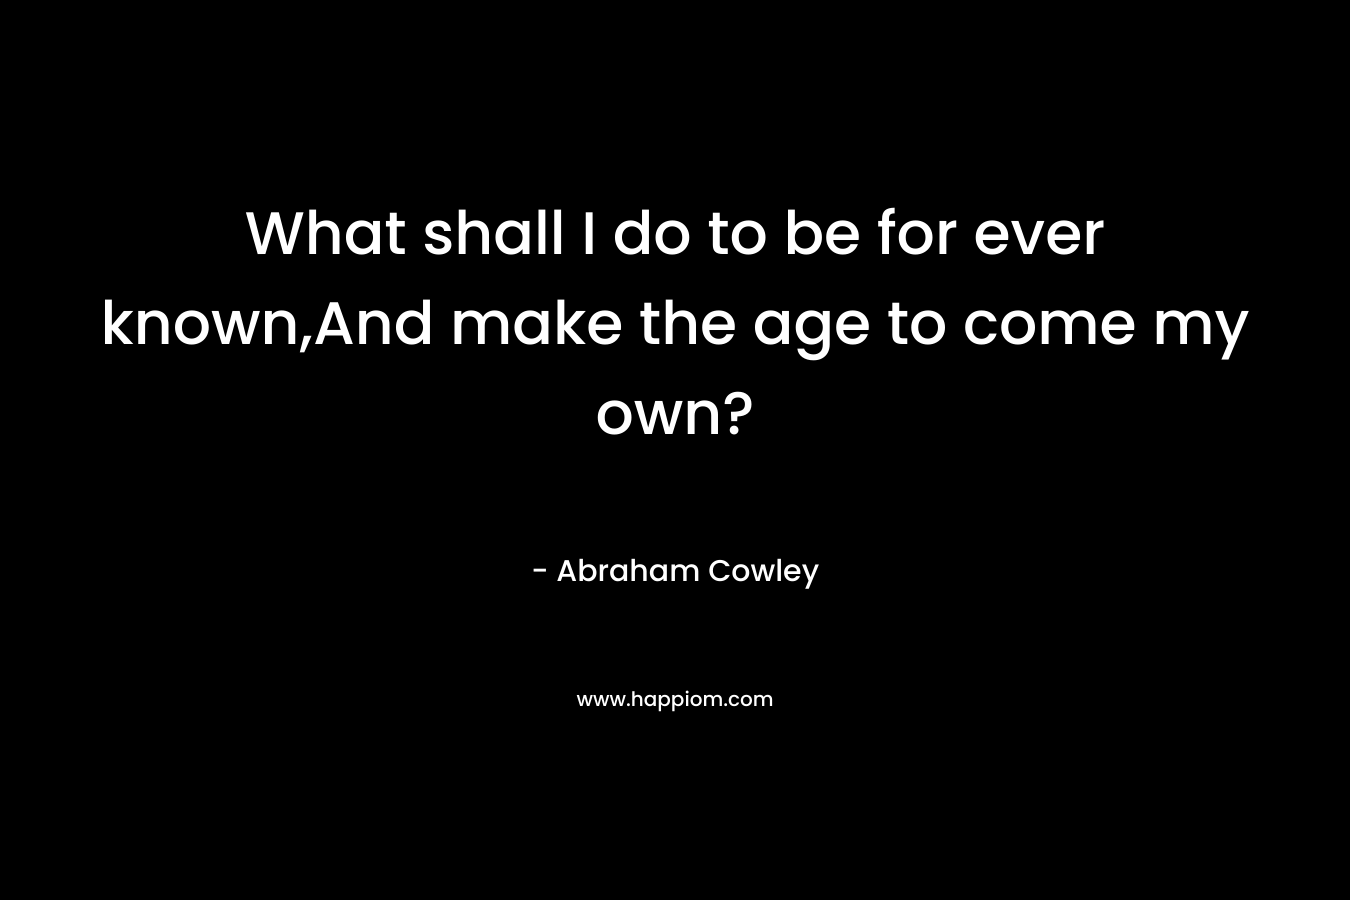 What shall I do to be for ever known,And make the age to come my own?